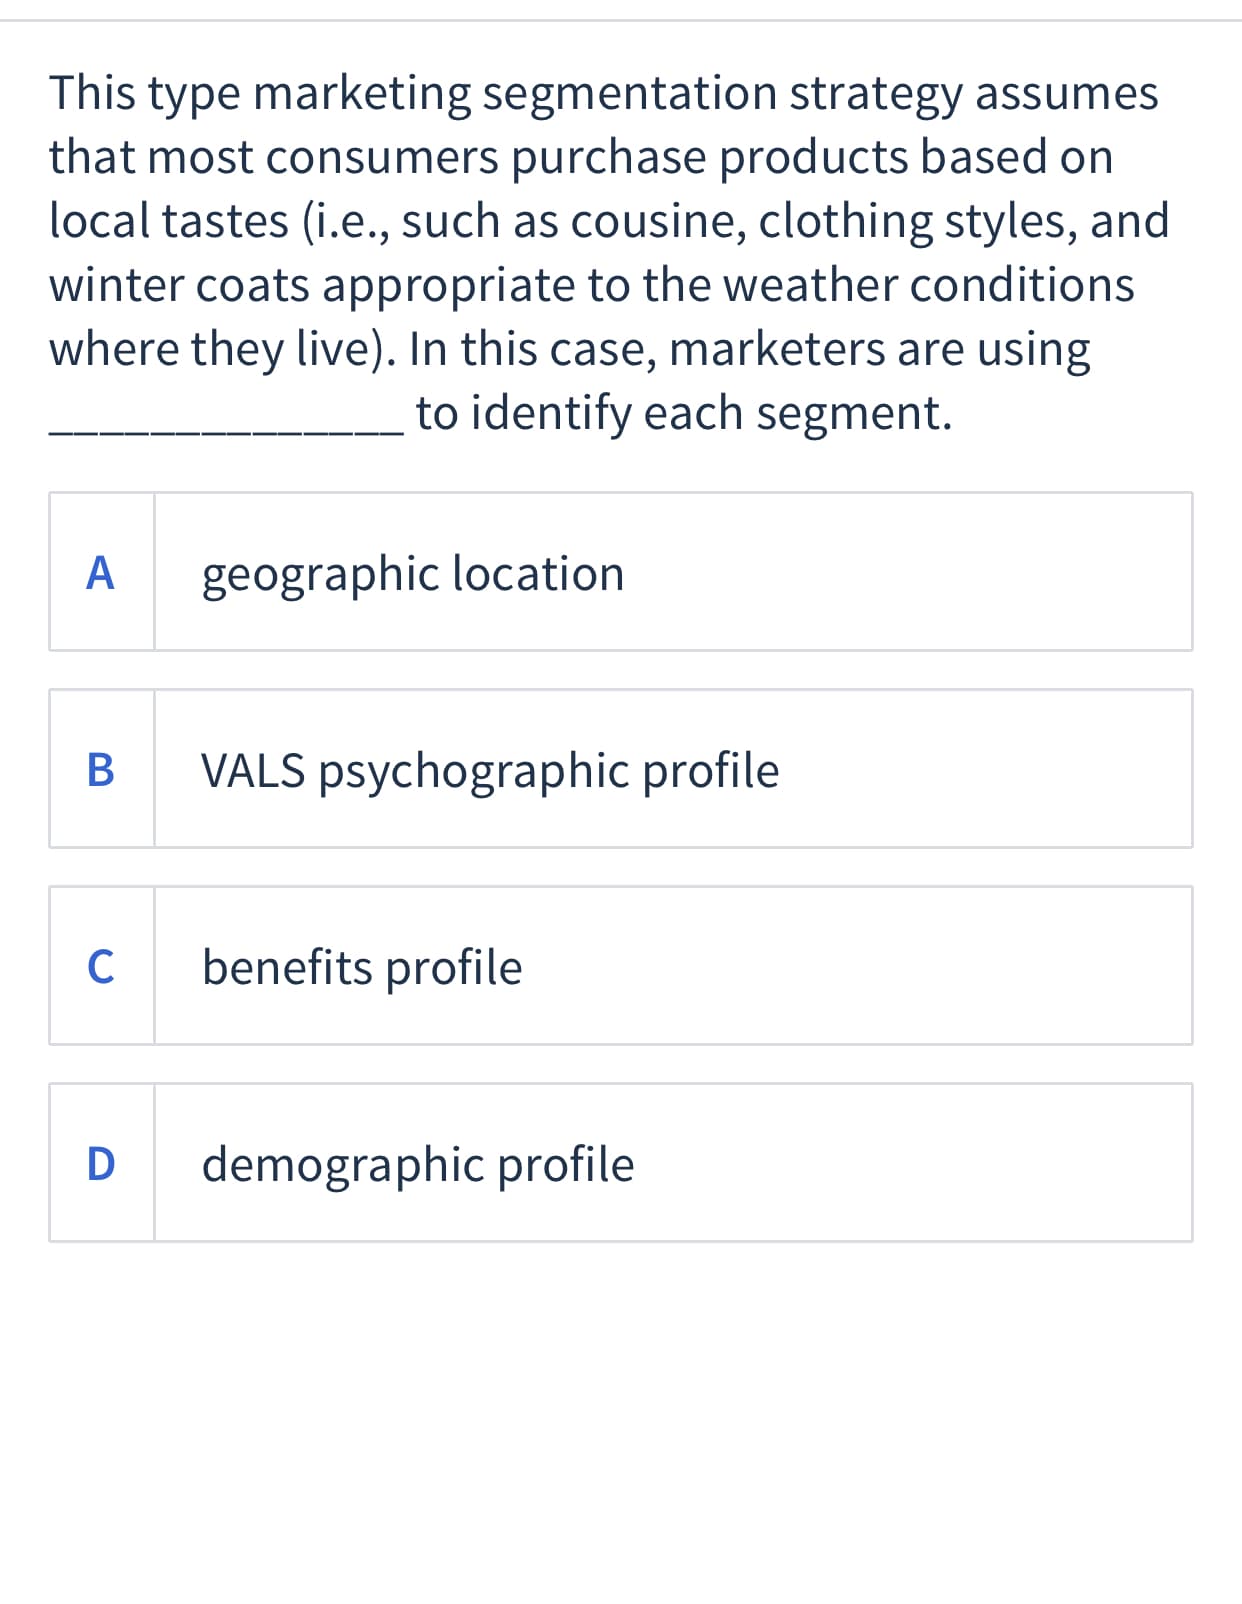 This type marketing segmentation strategy assumes
that most consumers purchase products based on
local tastes (i.e., such as cousine, clothing styles, and
winter coats appropriate to the weather conditions
where they live). In this case, marketers are using
to identify each segment.
A
geographic location
В
VALS psychographic profile
C
benefits profile
D
demographic profile
